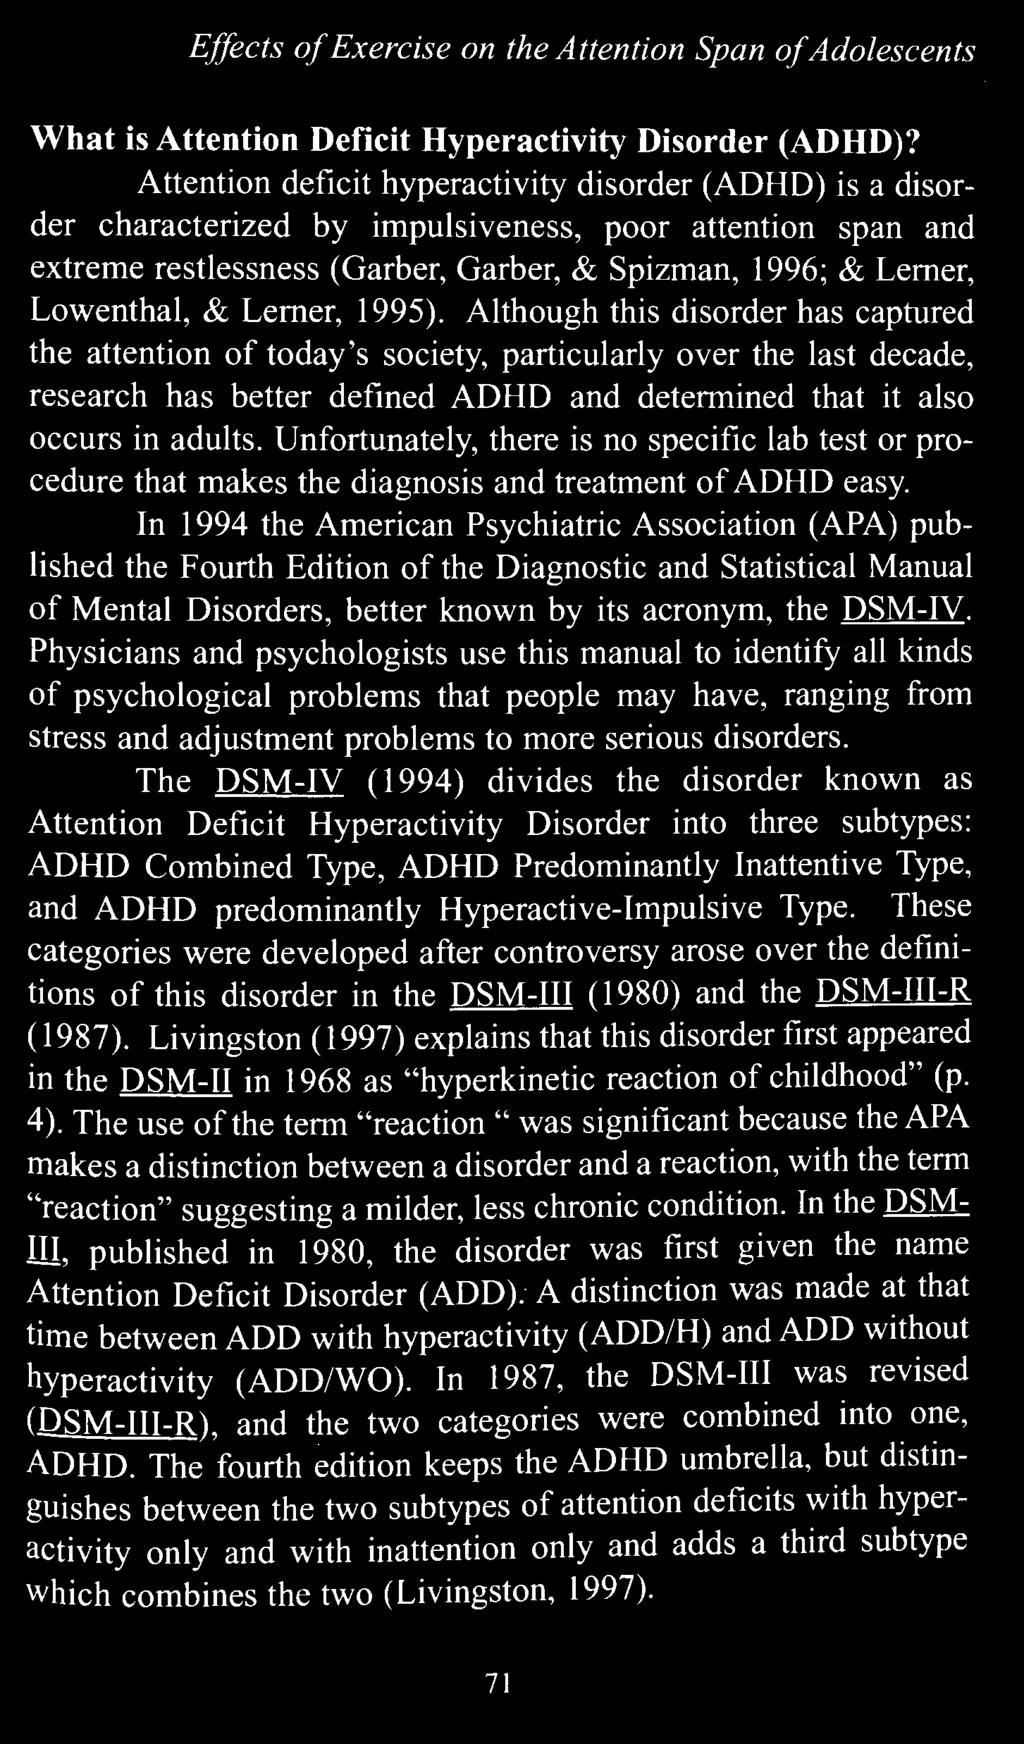 Effects of Exercise on the Attention Span of Adolescents What is Attention Deficit Hyperactivity Disorder (ADHD)?